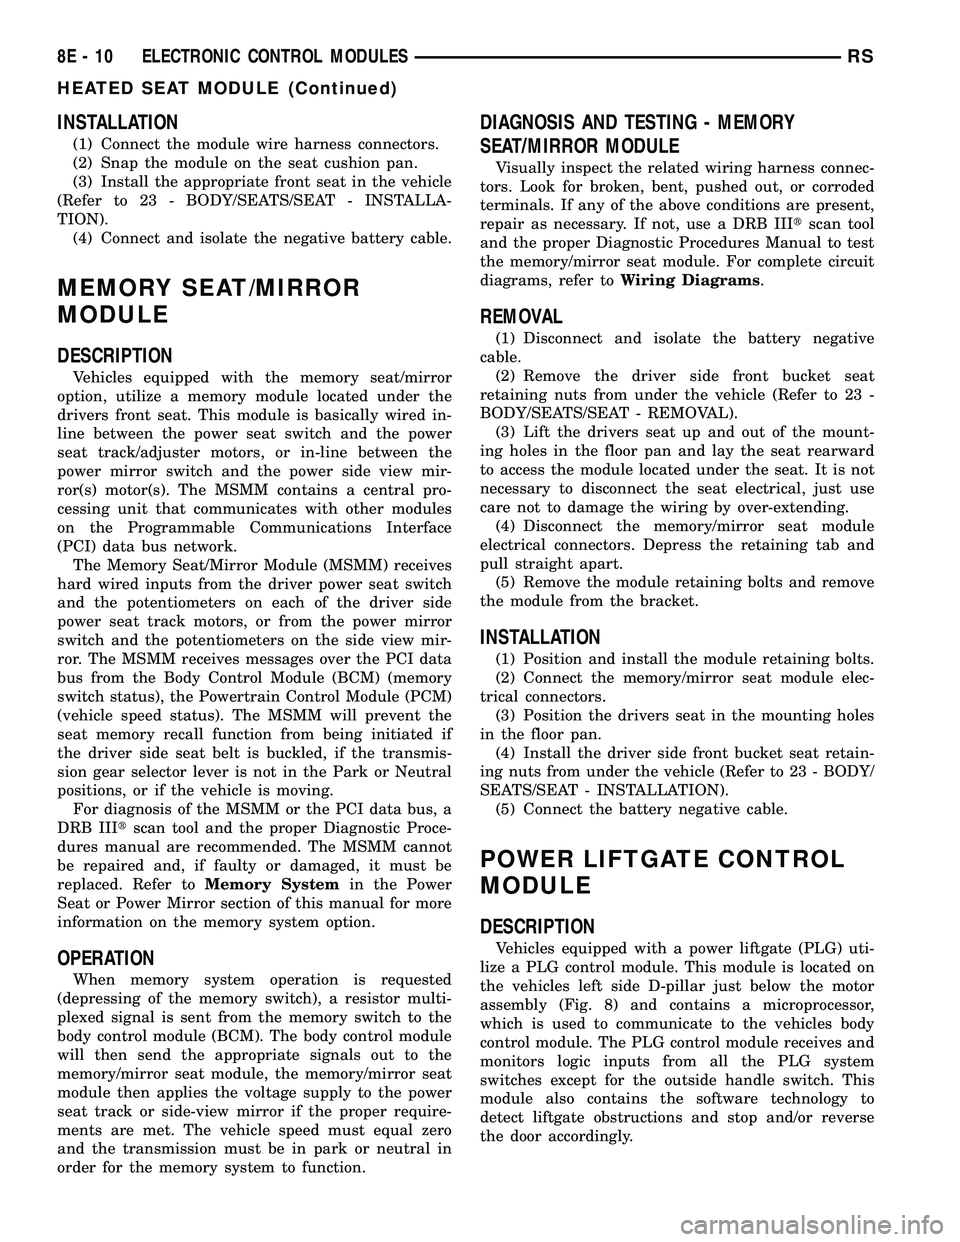 CHRYSLER VOYAGER 2004  Service Manual INSTALLATION
(1) Connect the module wire harness connectors.
(2) Snap the module on the seat cushion pan.
(3) Install the appropriate front seat in the vehicle
(Refer to 23 - BODY/SEATS/SEAT - INSTALL